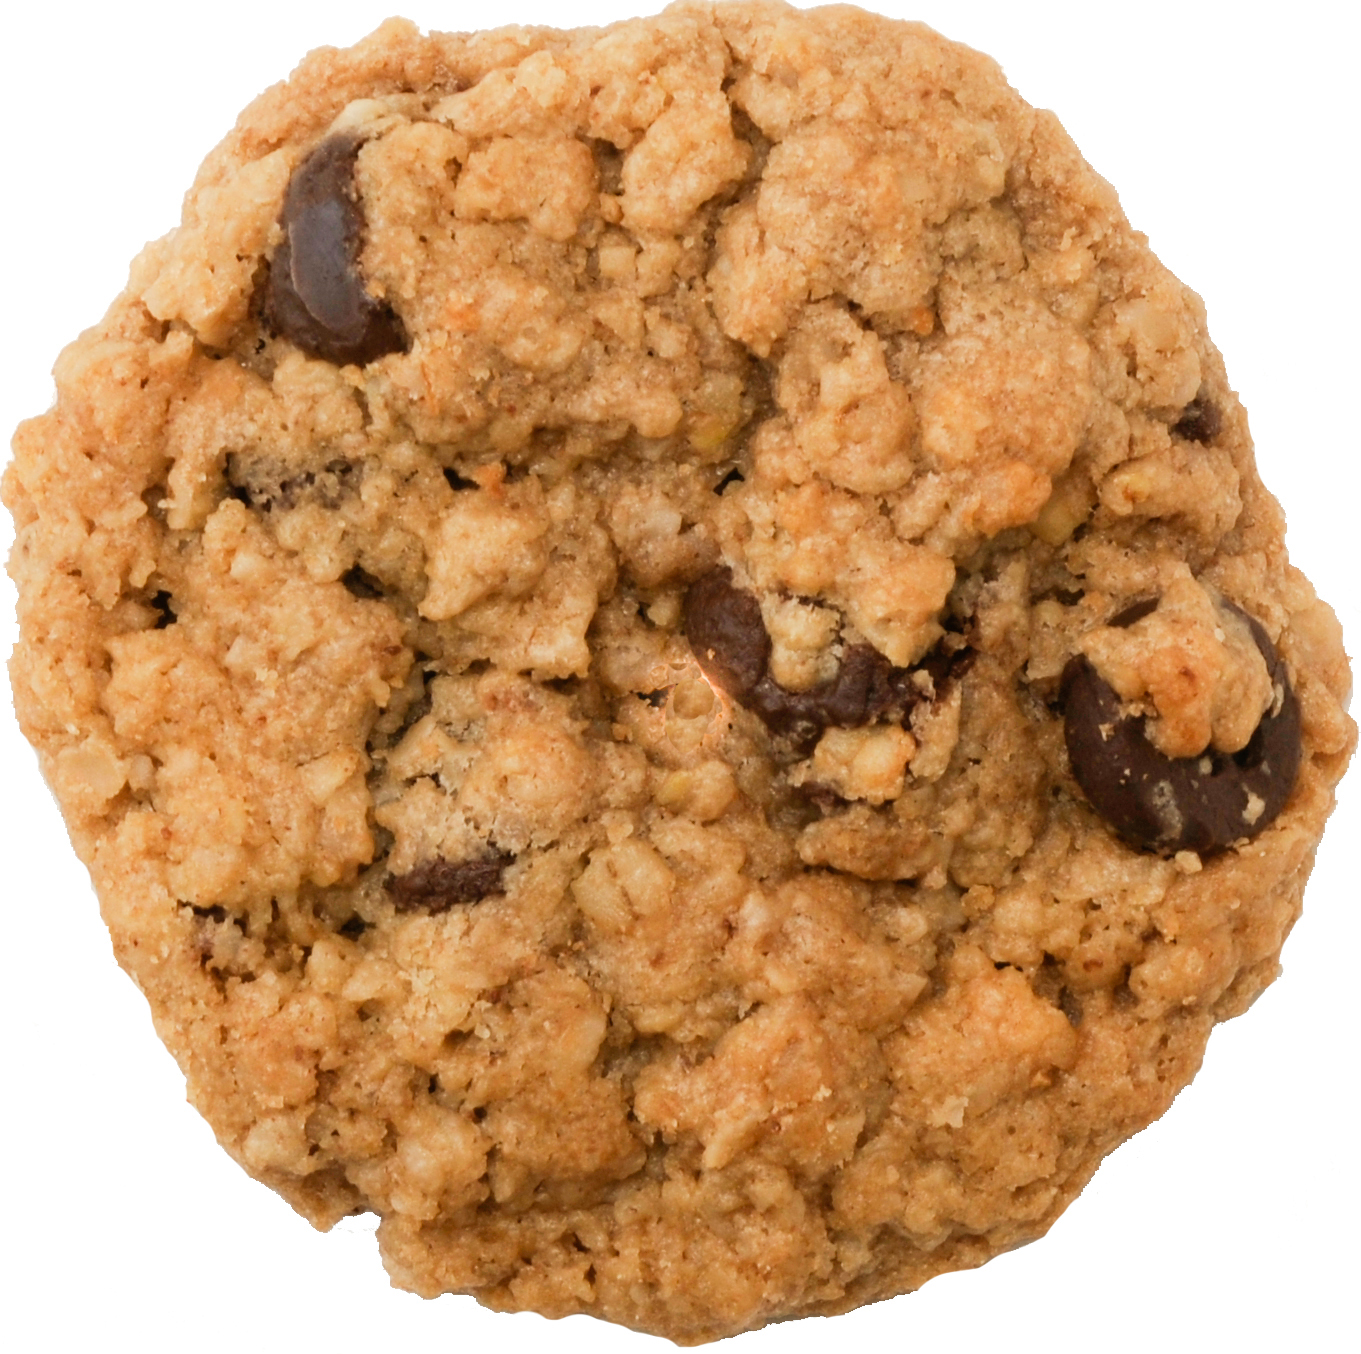 PHOTO: The Girl Scouts are adding three new cookie varieties to their delicious ranks this year: Rah-Rah Raisin oatmeal cookies and two gluten-free. 
